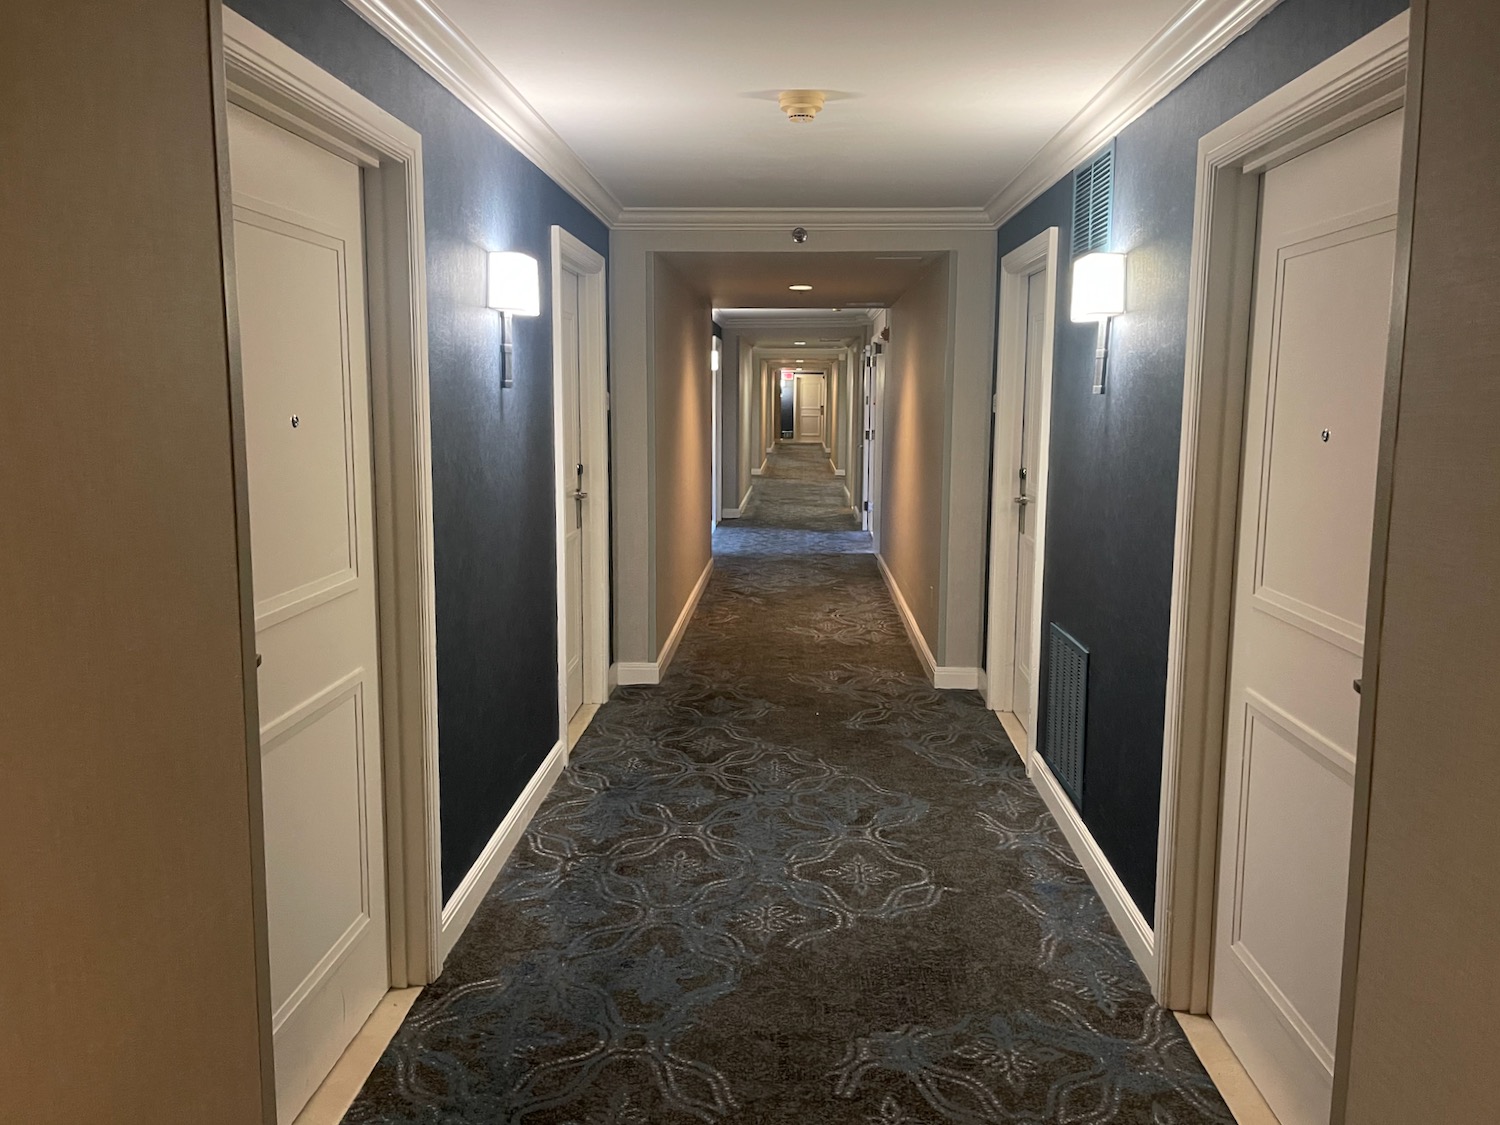 a hallway with doors and a patterned carpet